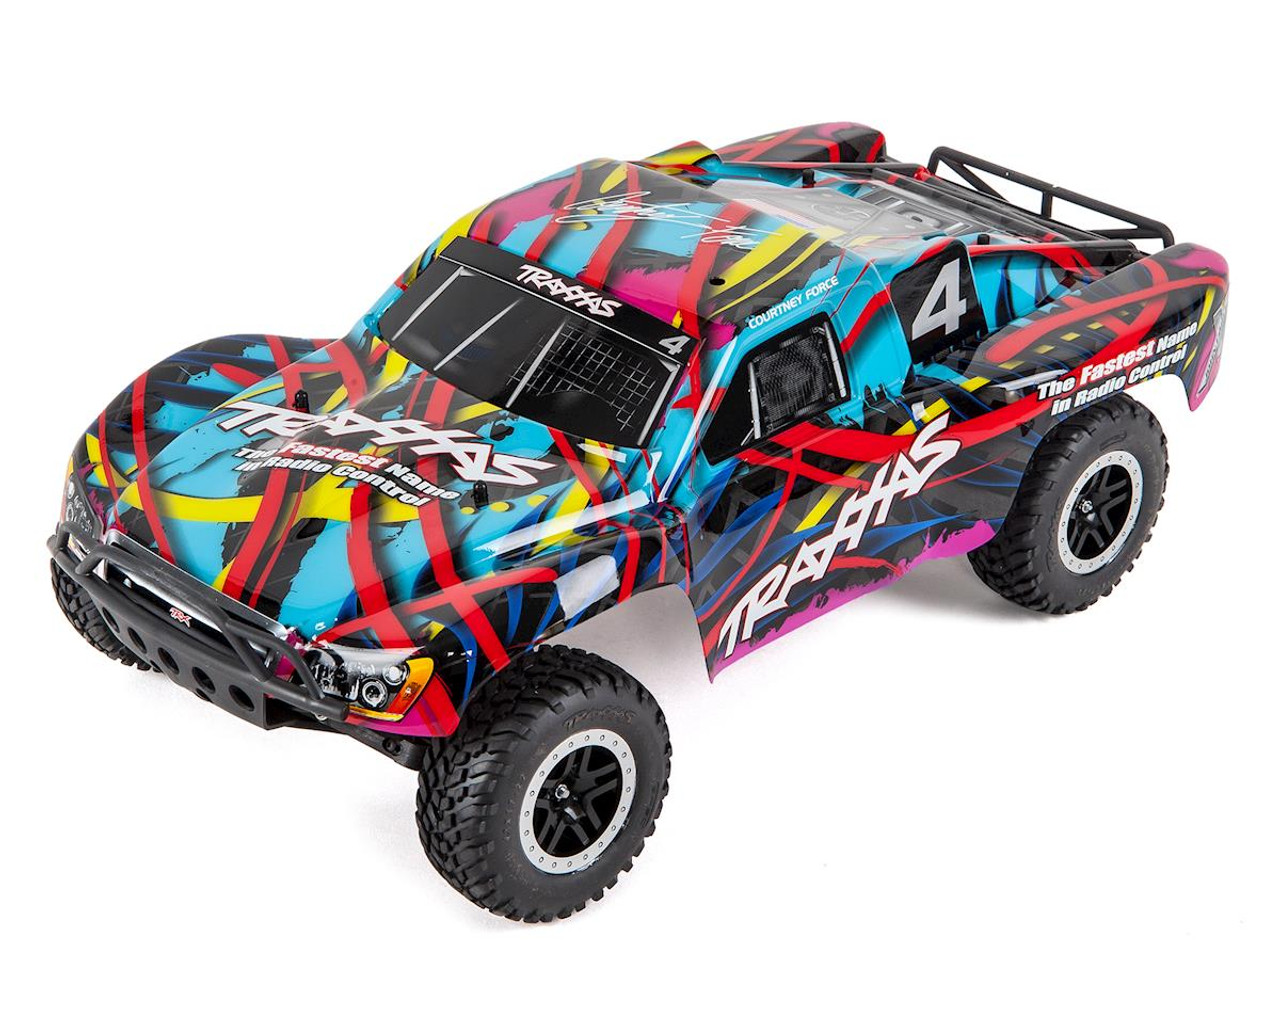 TRAXXAS 58034-1_HWN Slash: 1/10-Scale 2WD Short Course Racing Truck with TQ 2.4GHz radio system